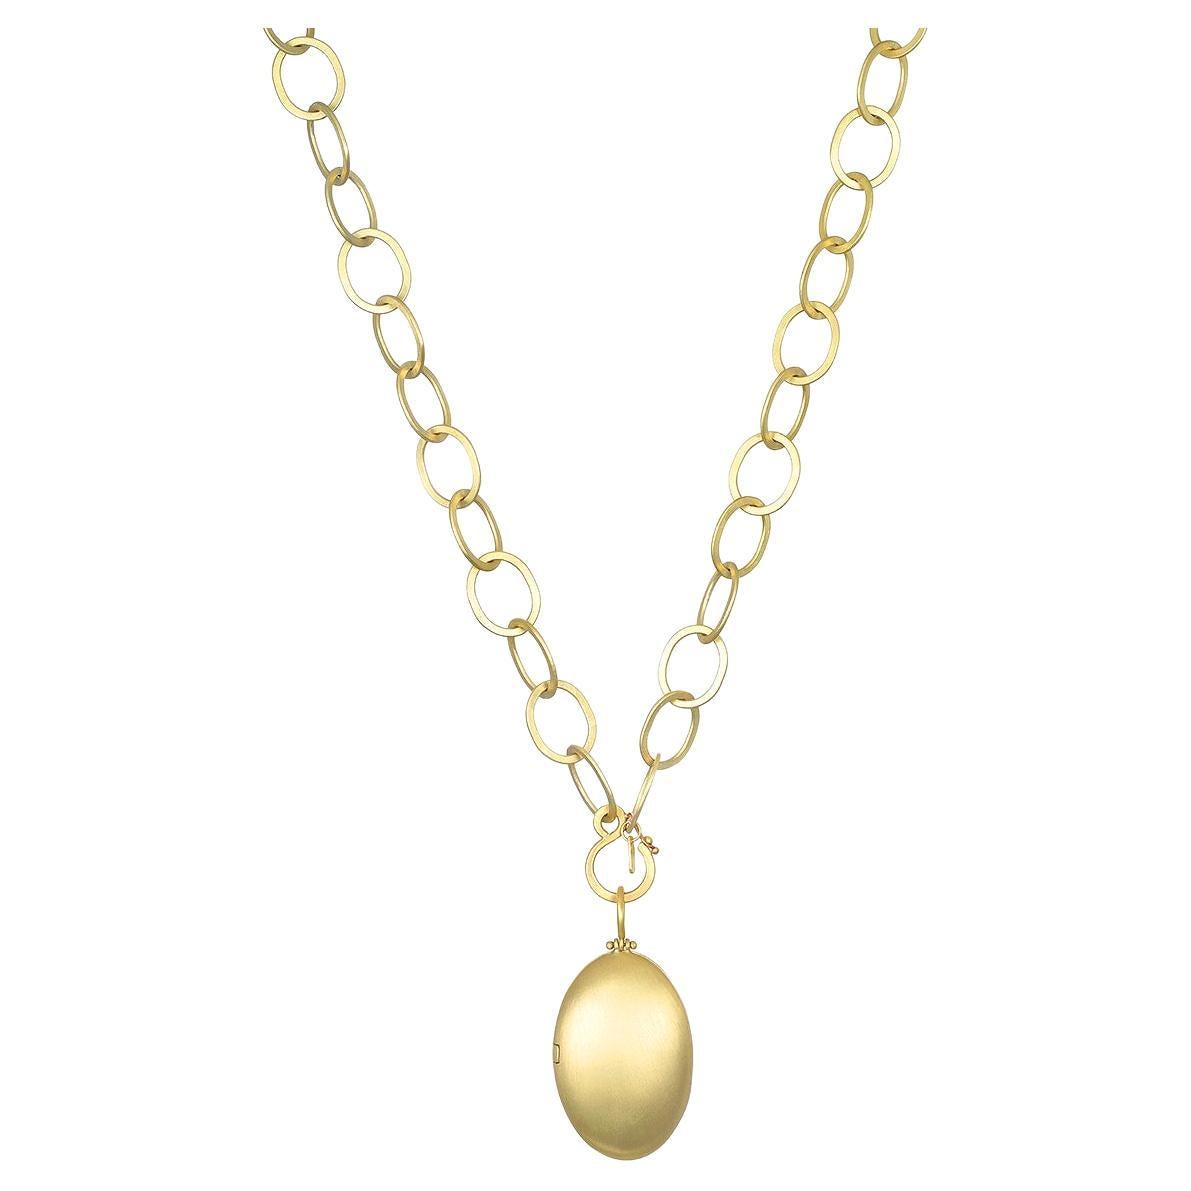 Faye Kim 18 Karat Gold Heavy Oval Planished XL Link Chain and Large Oval Locket For Sale